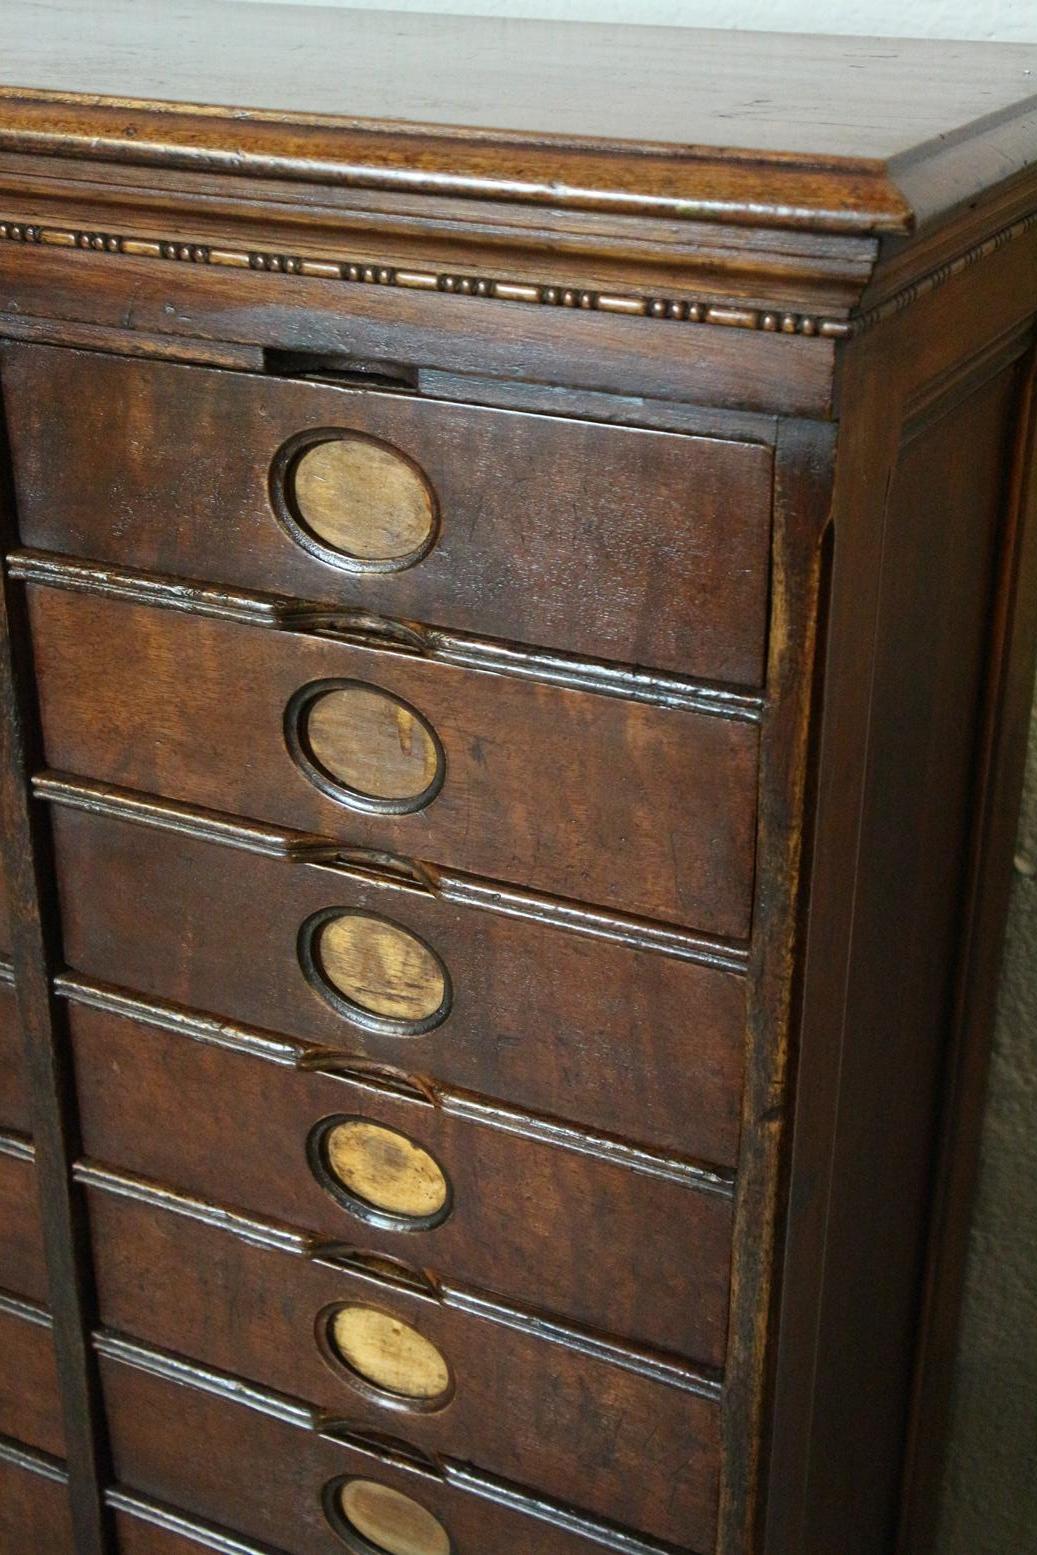 Aged antique walnut filing cabinet from the Amberg company. A total of 36 drawers. In good and original condition. Practical cabinet for multiple purposes.
Origin: US
Period: circa 1900
Size: br. 146cm x 32cm x H 111cm.